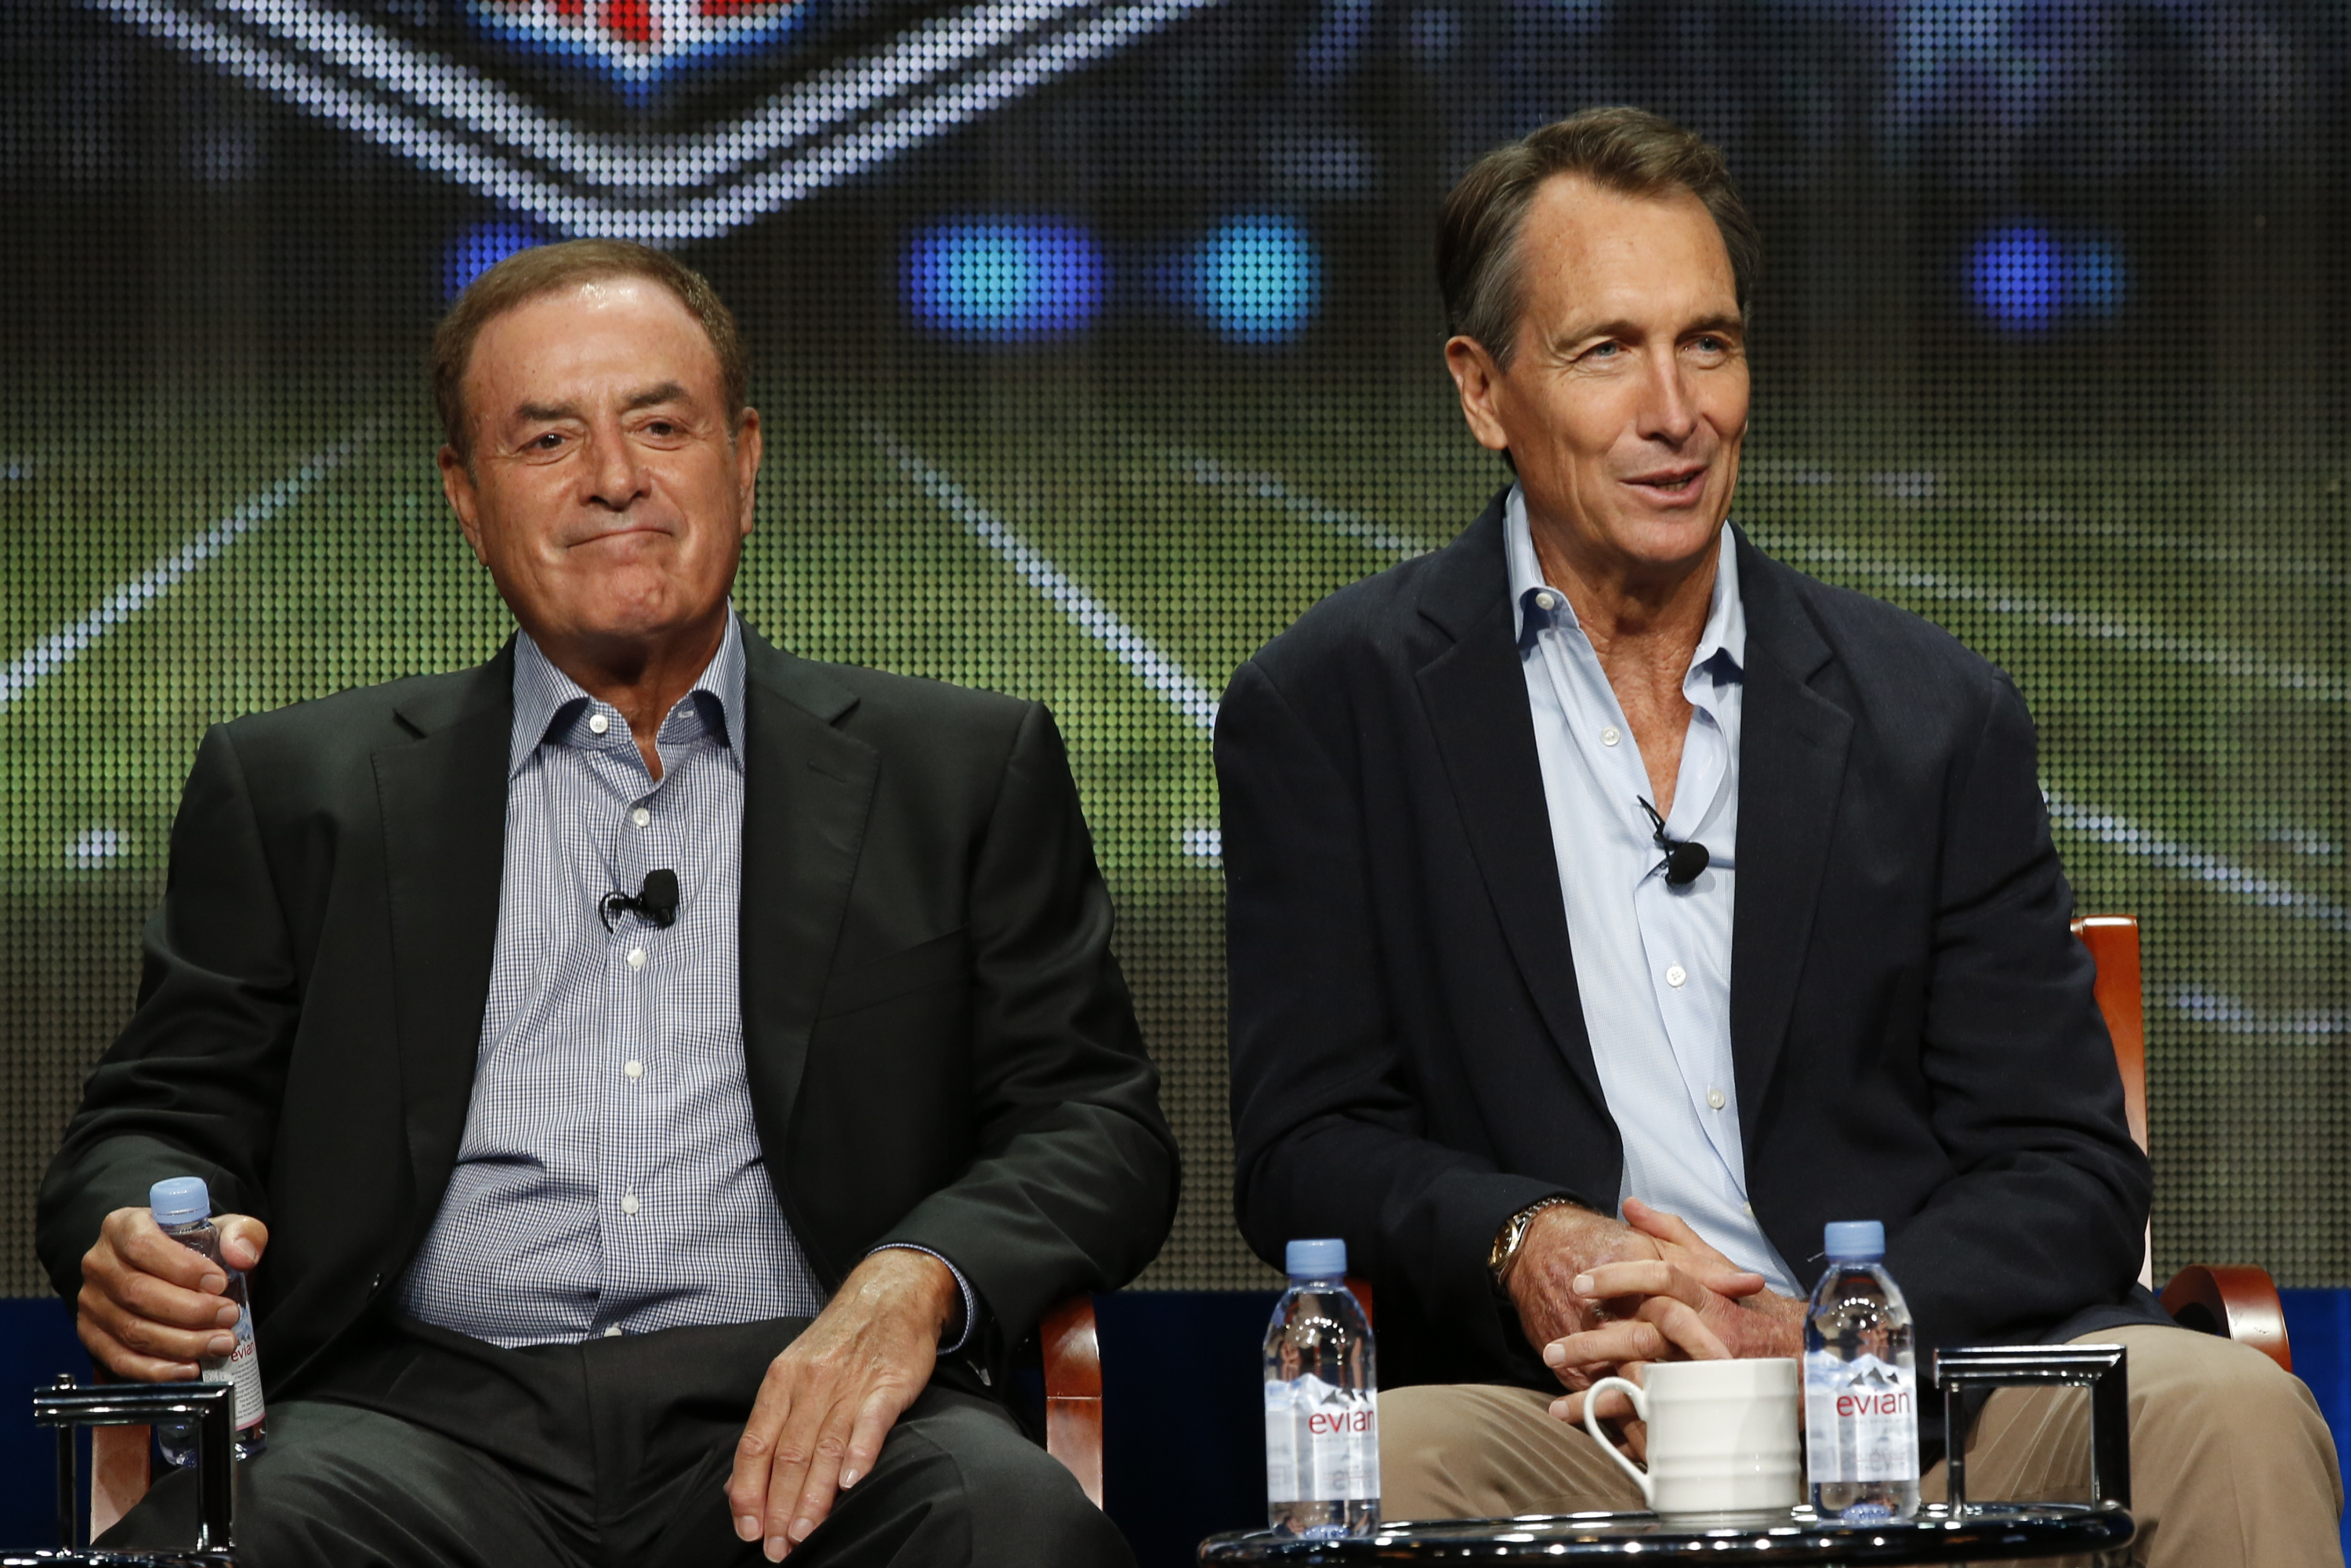 Even NBC's Al Michaels agrees that NFL games aren't the same without live fans in the building.